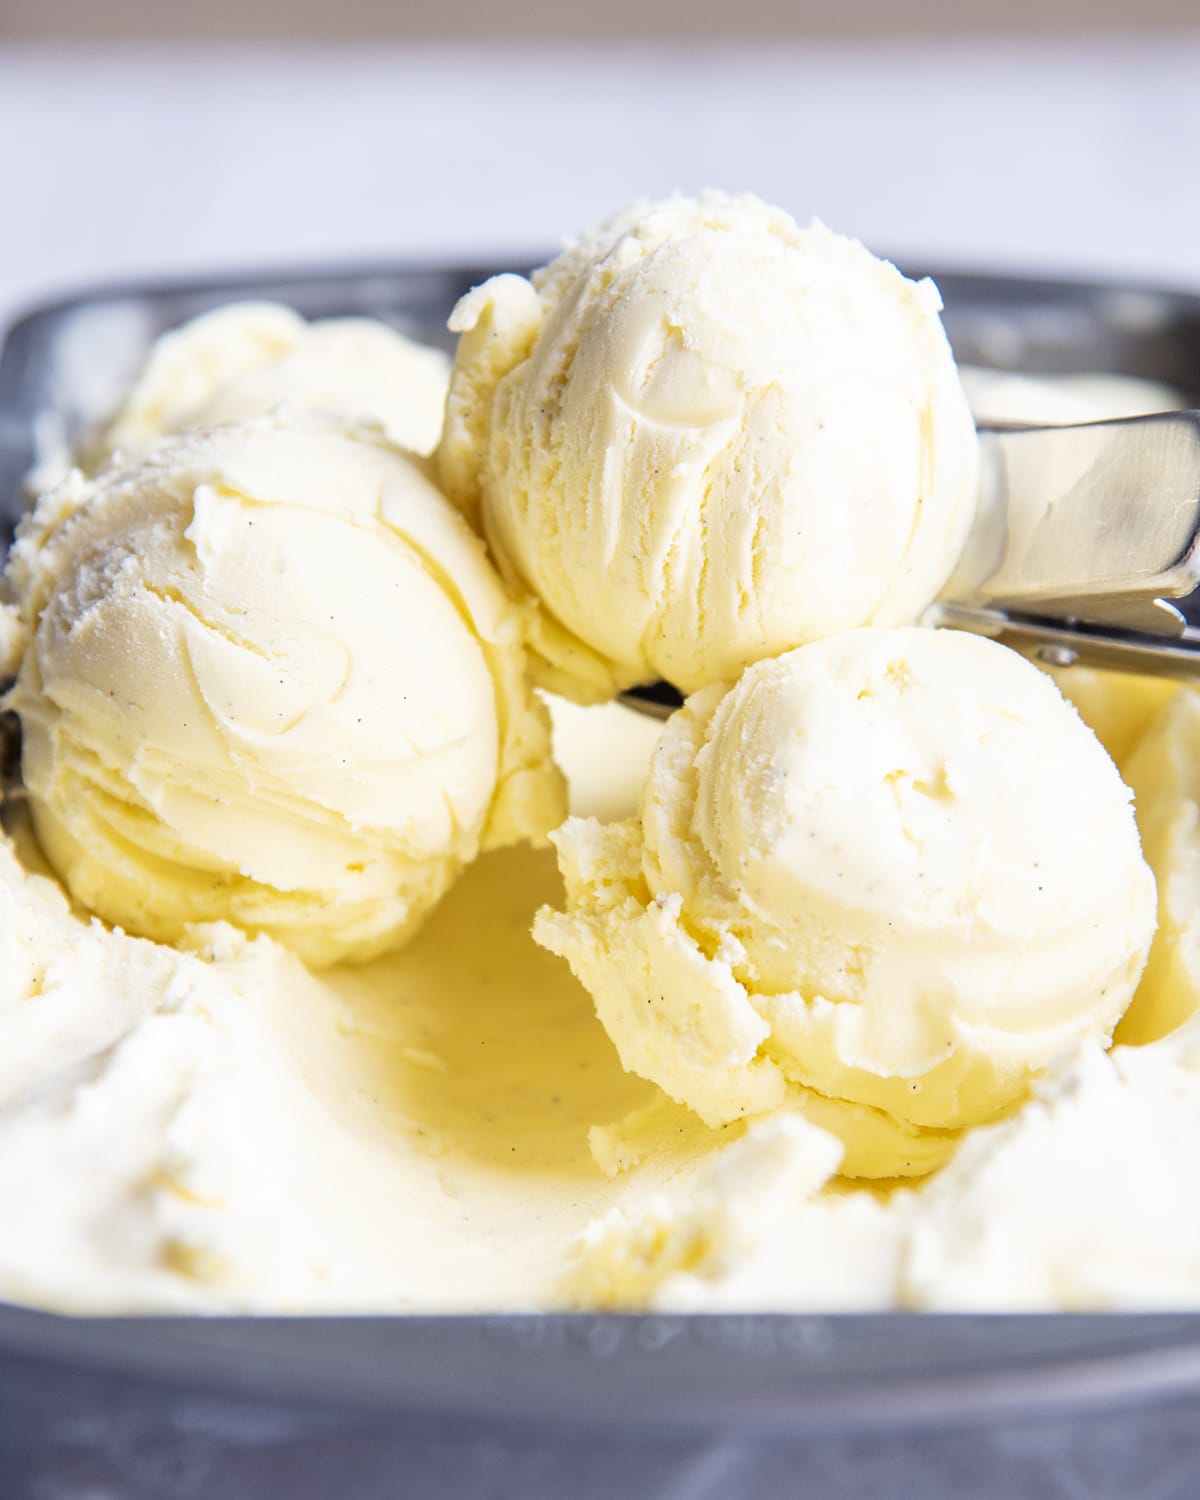 A close up of three scoops of homemade vanilla bean ice cream in a container of the ice cream.